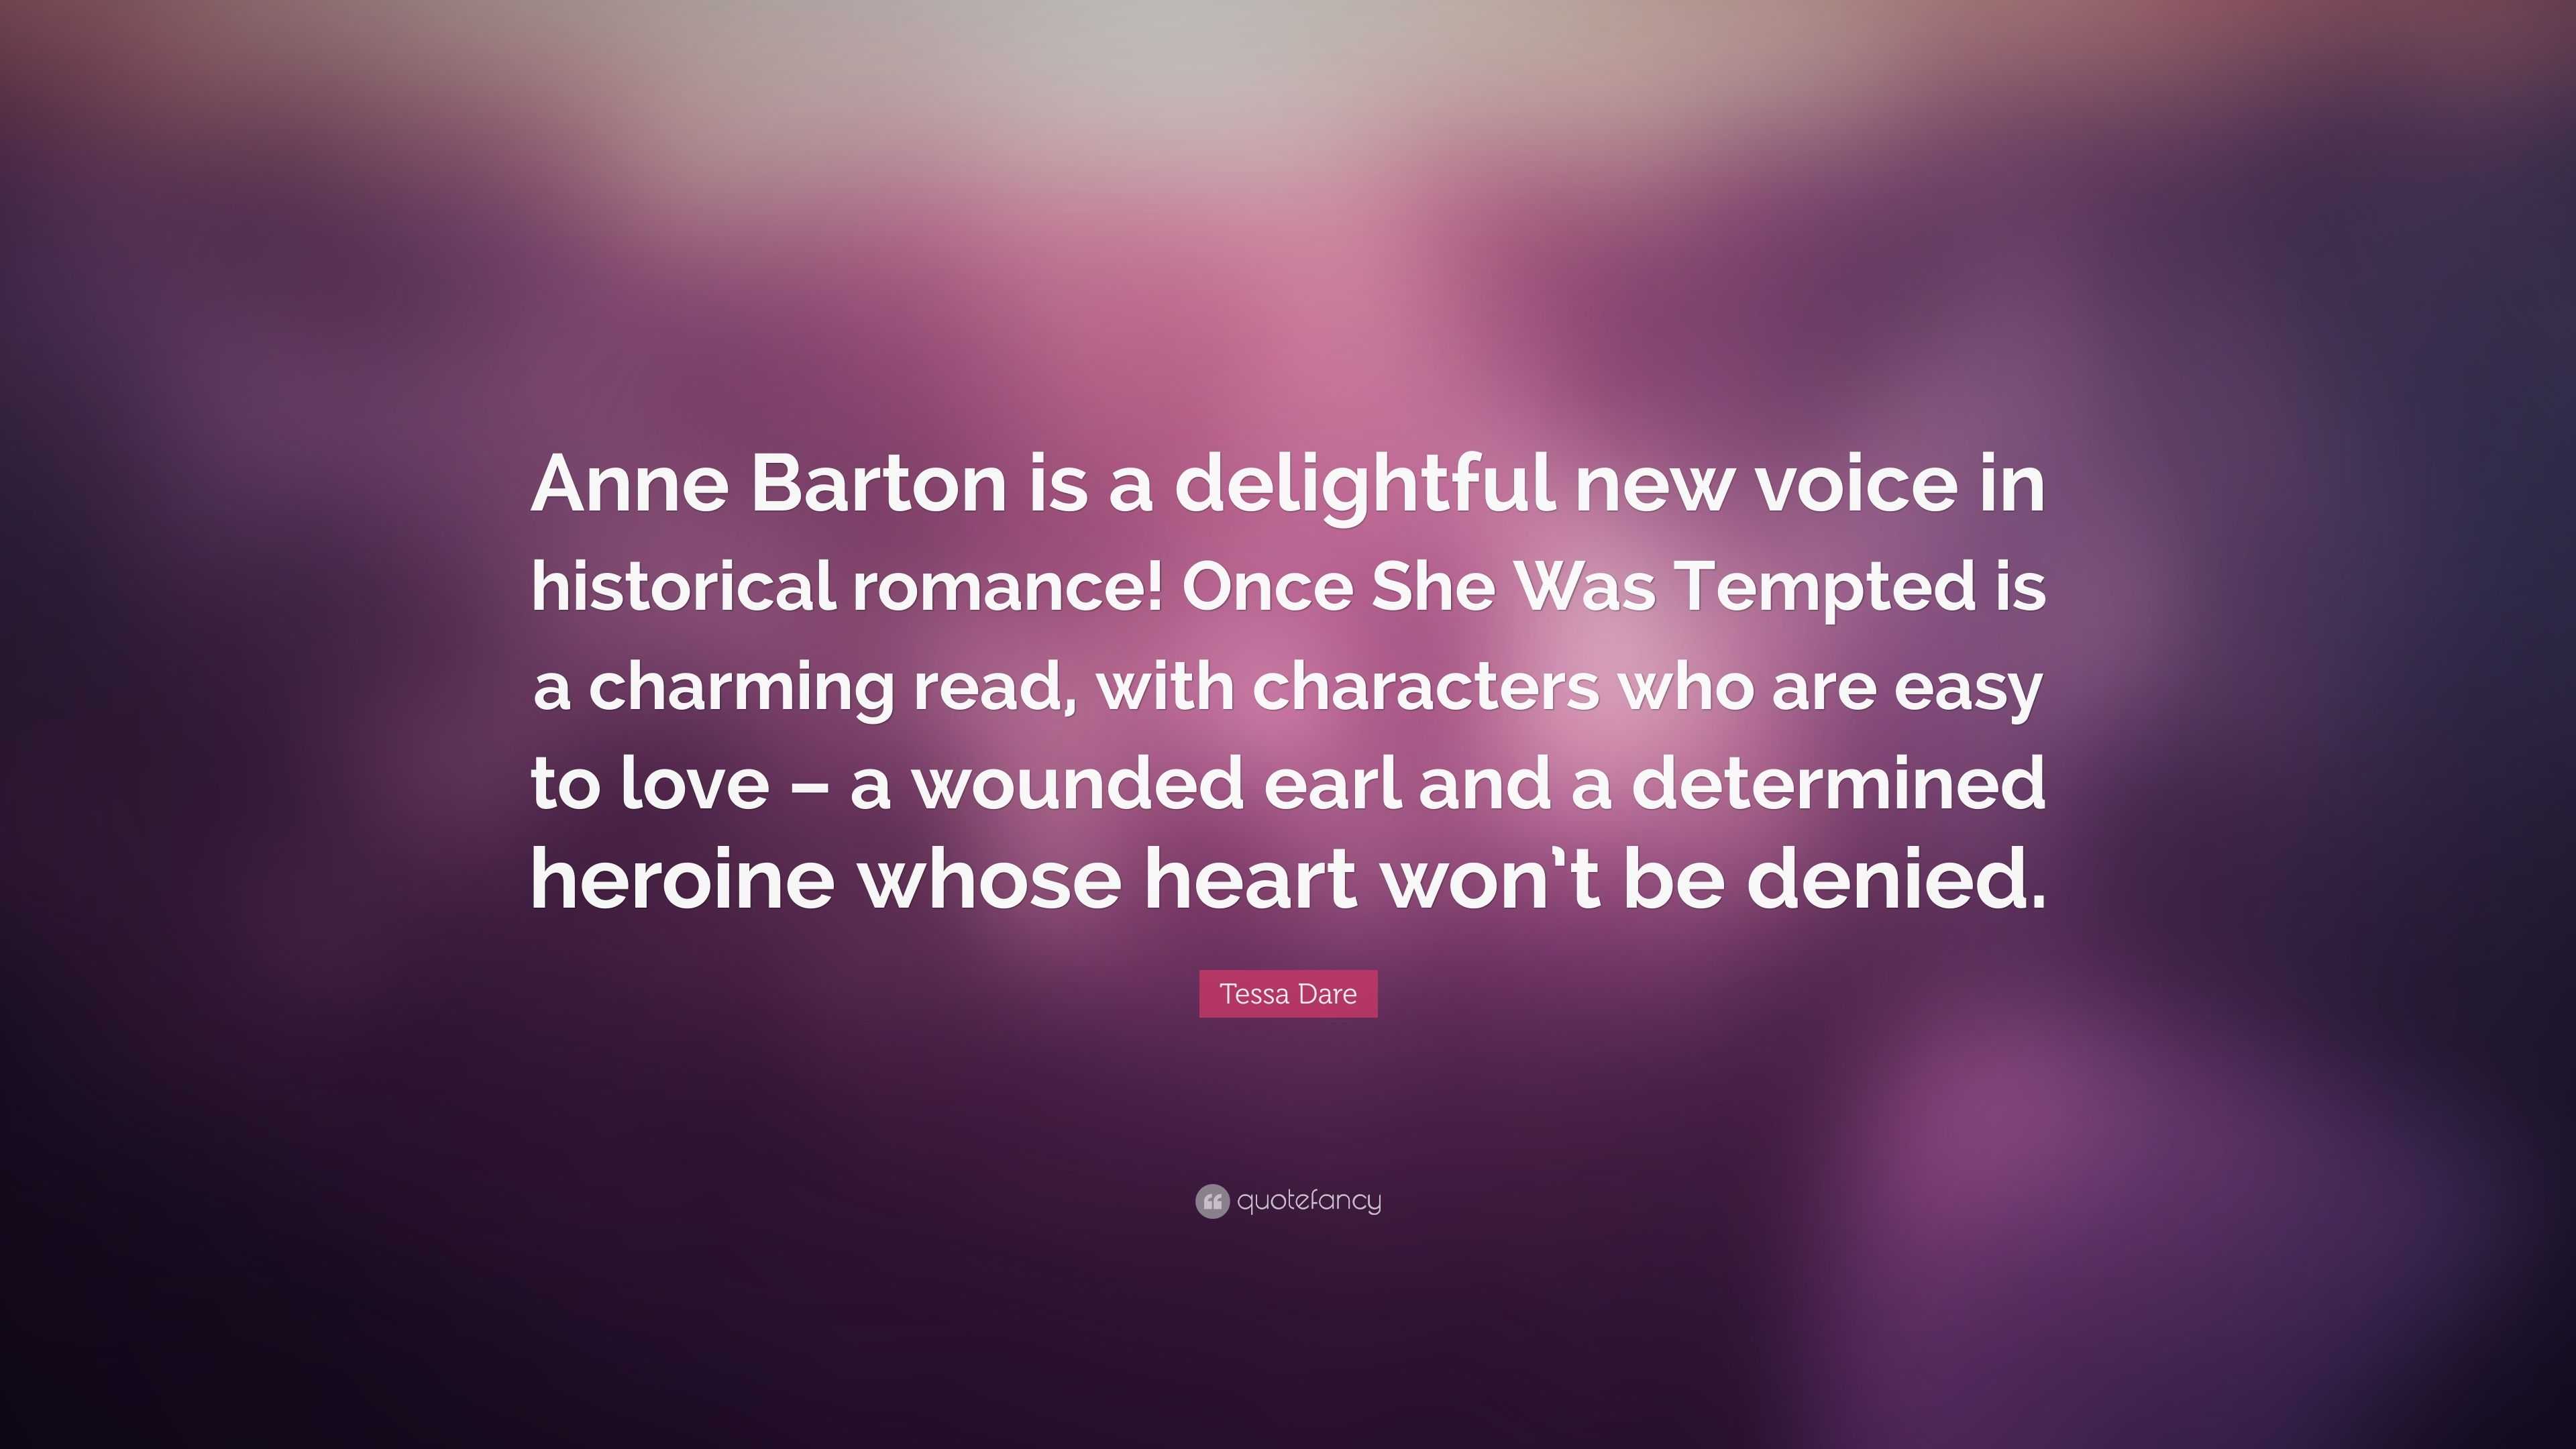 Once She Was Tempted by Anne Barton